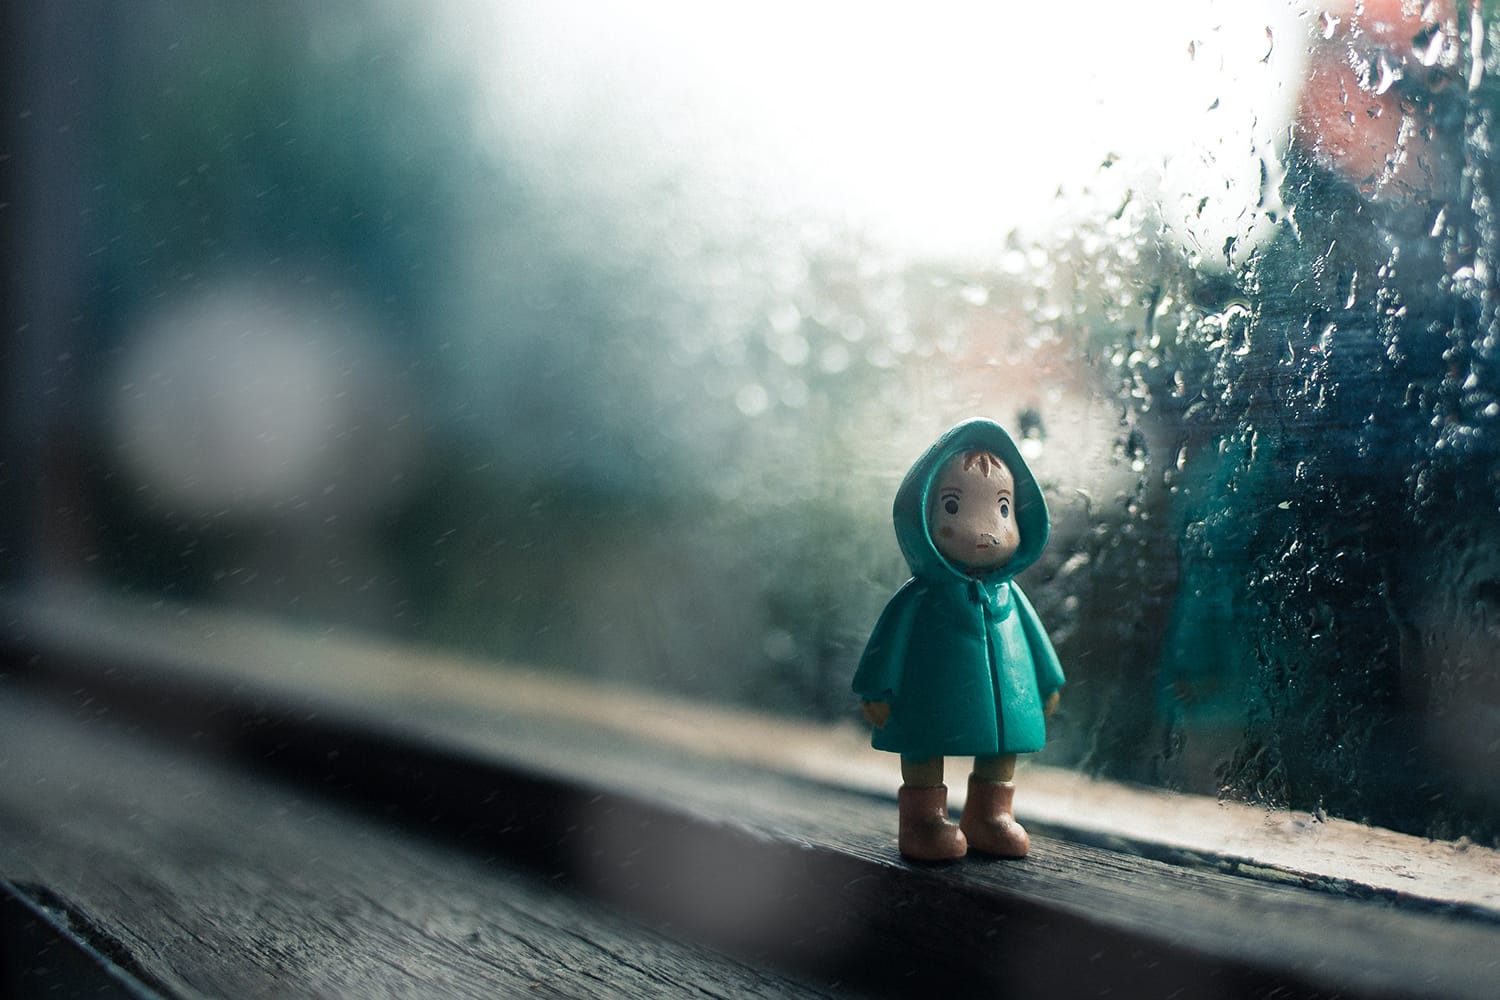 Helpful Tips & Tricks for Successfully Taking Photos in the Rain